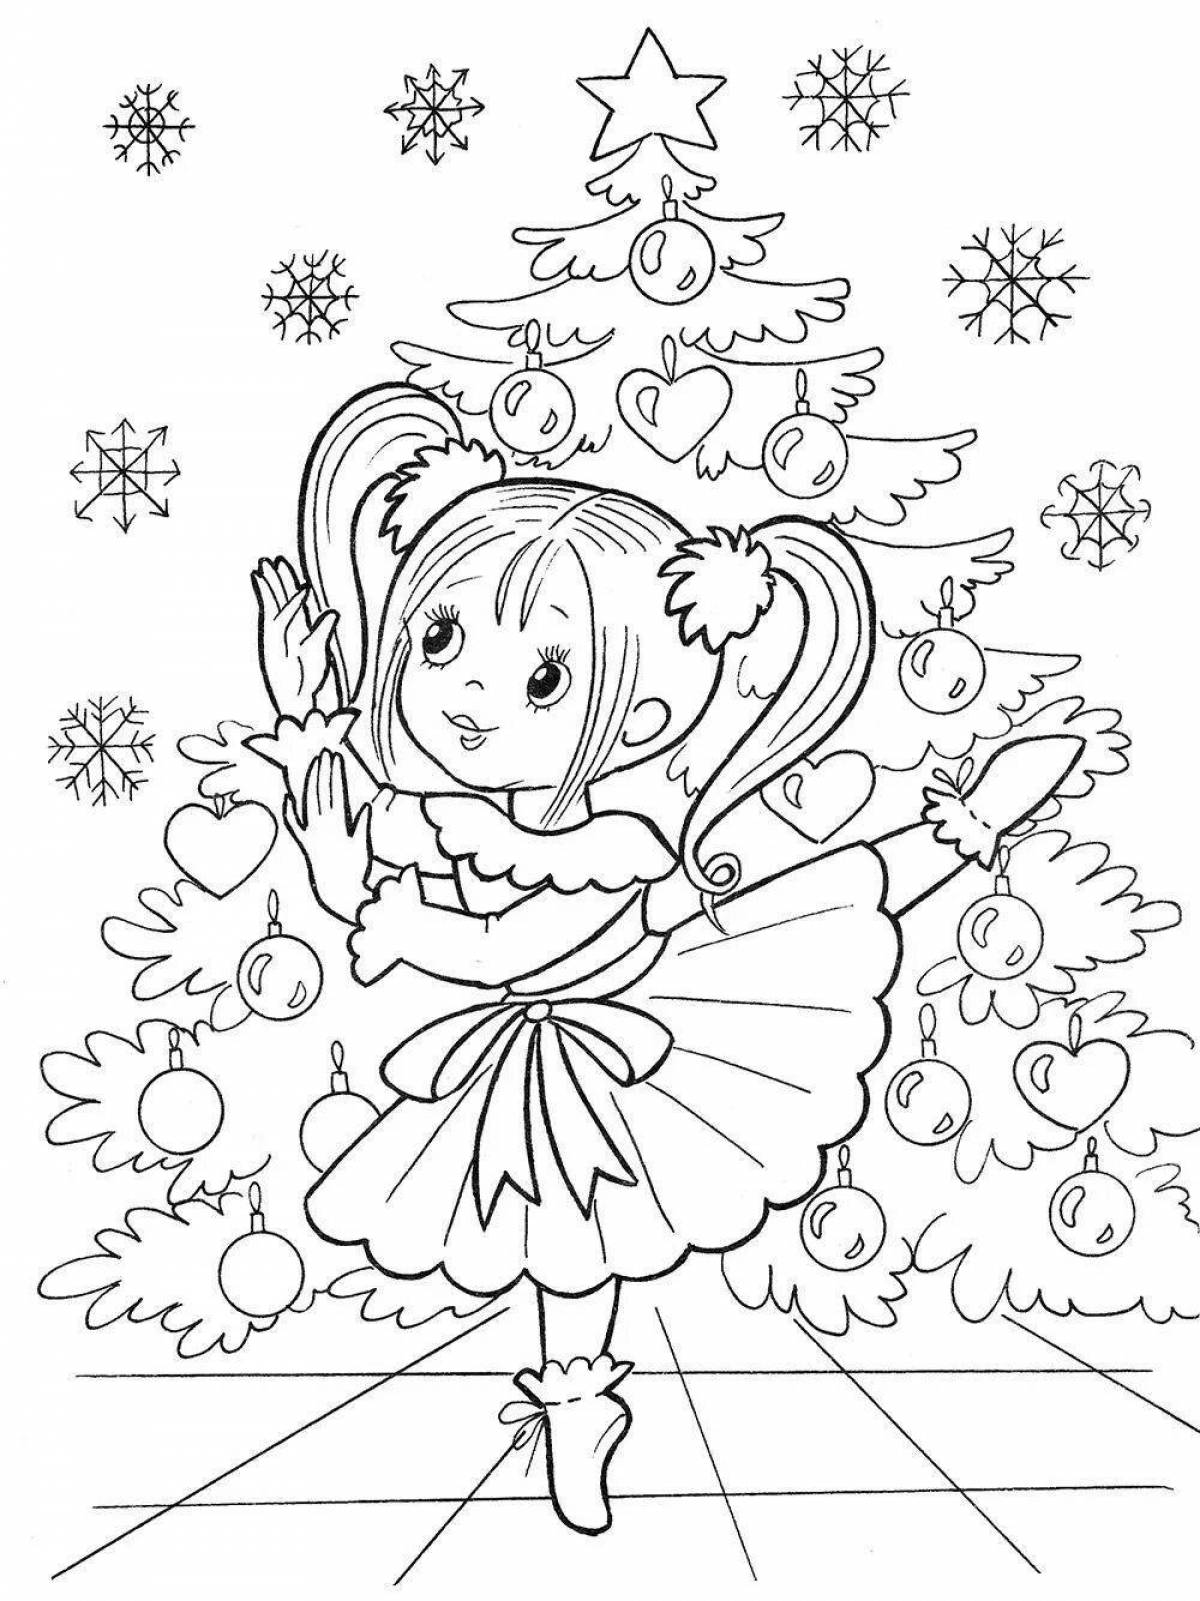 Playful Christmas coloring book for 10 year old girls